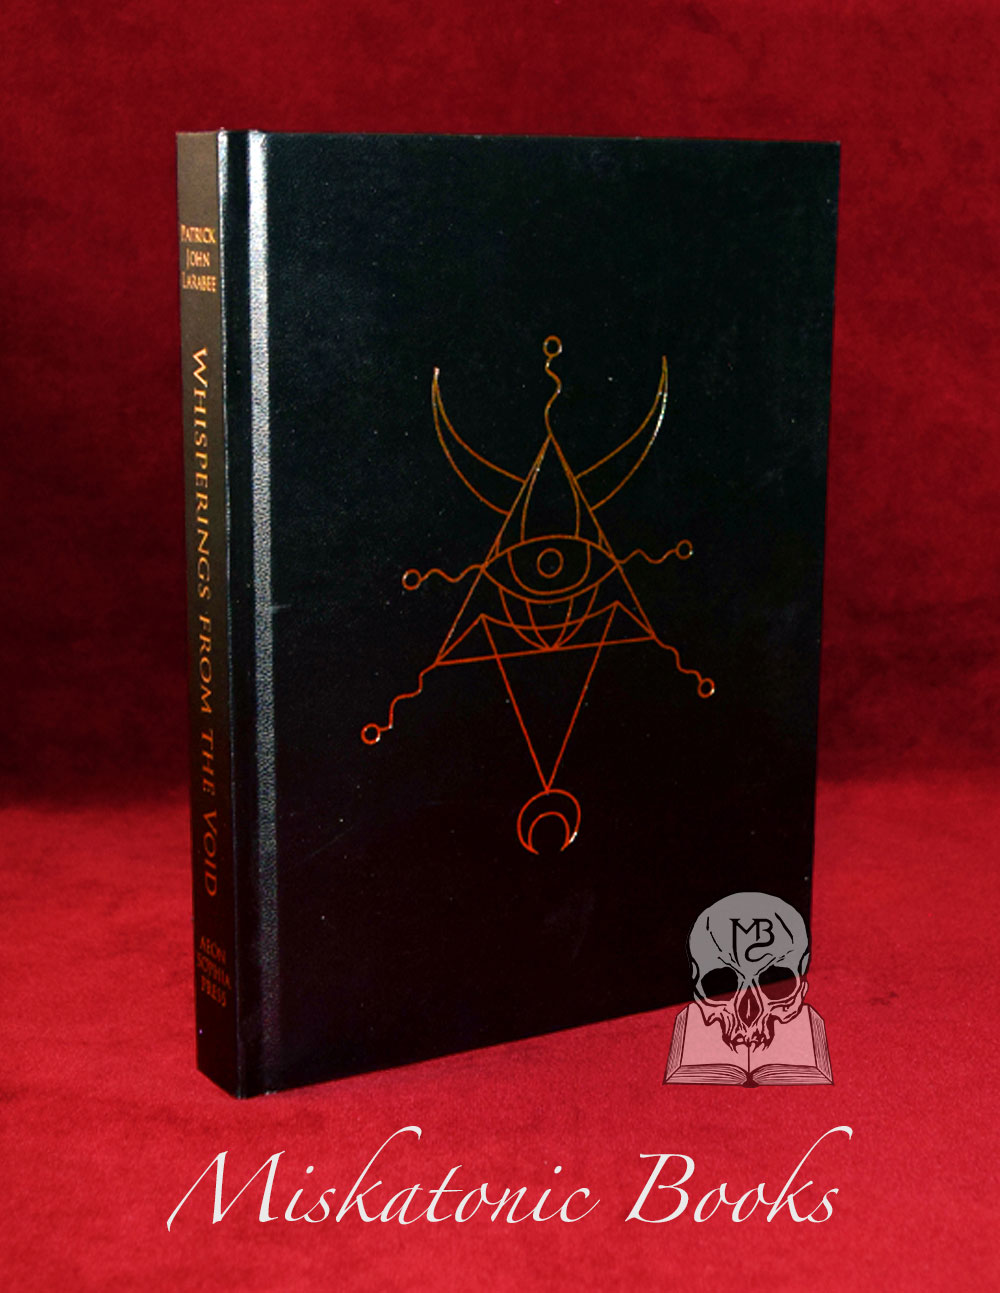 WHISPERINGS FROM THE VOID by Patrick John Larabee (Hardcover Edition)